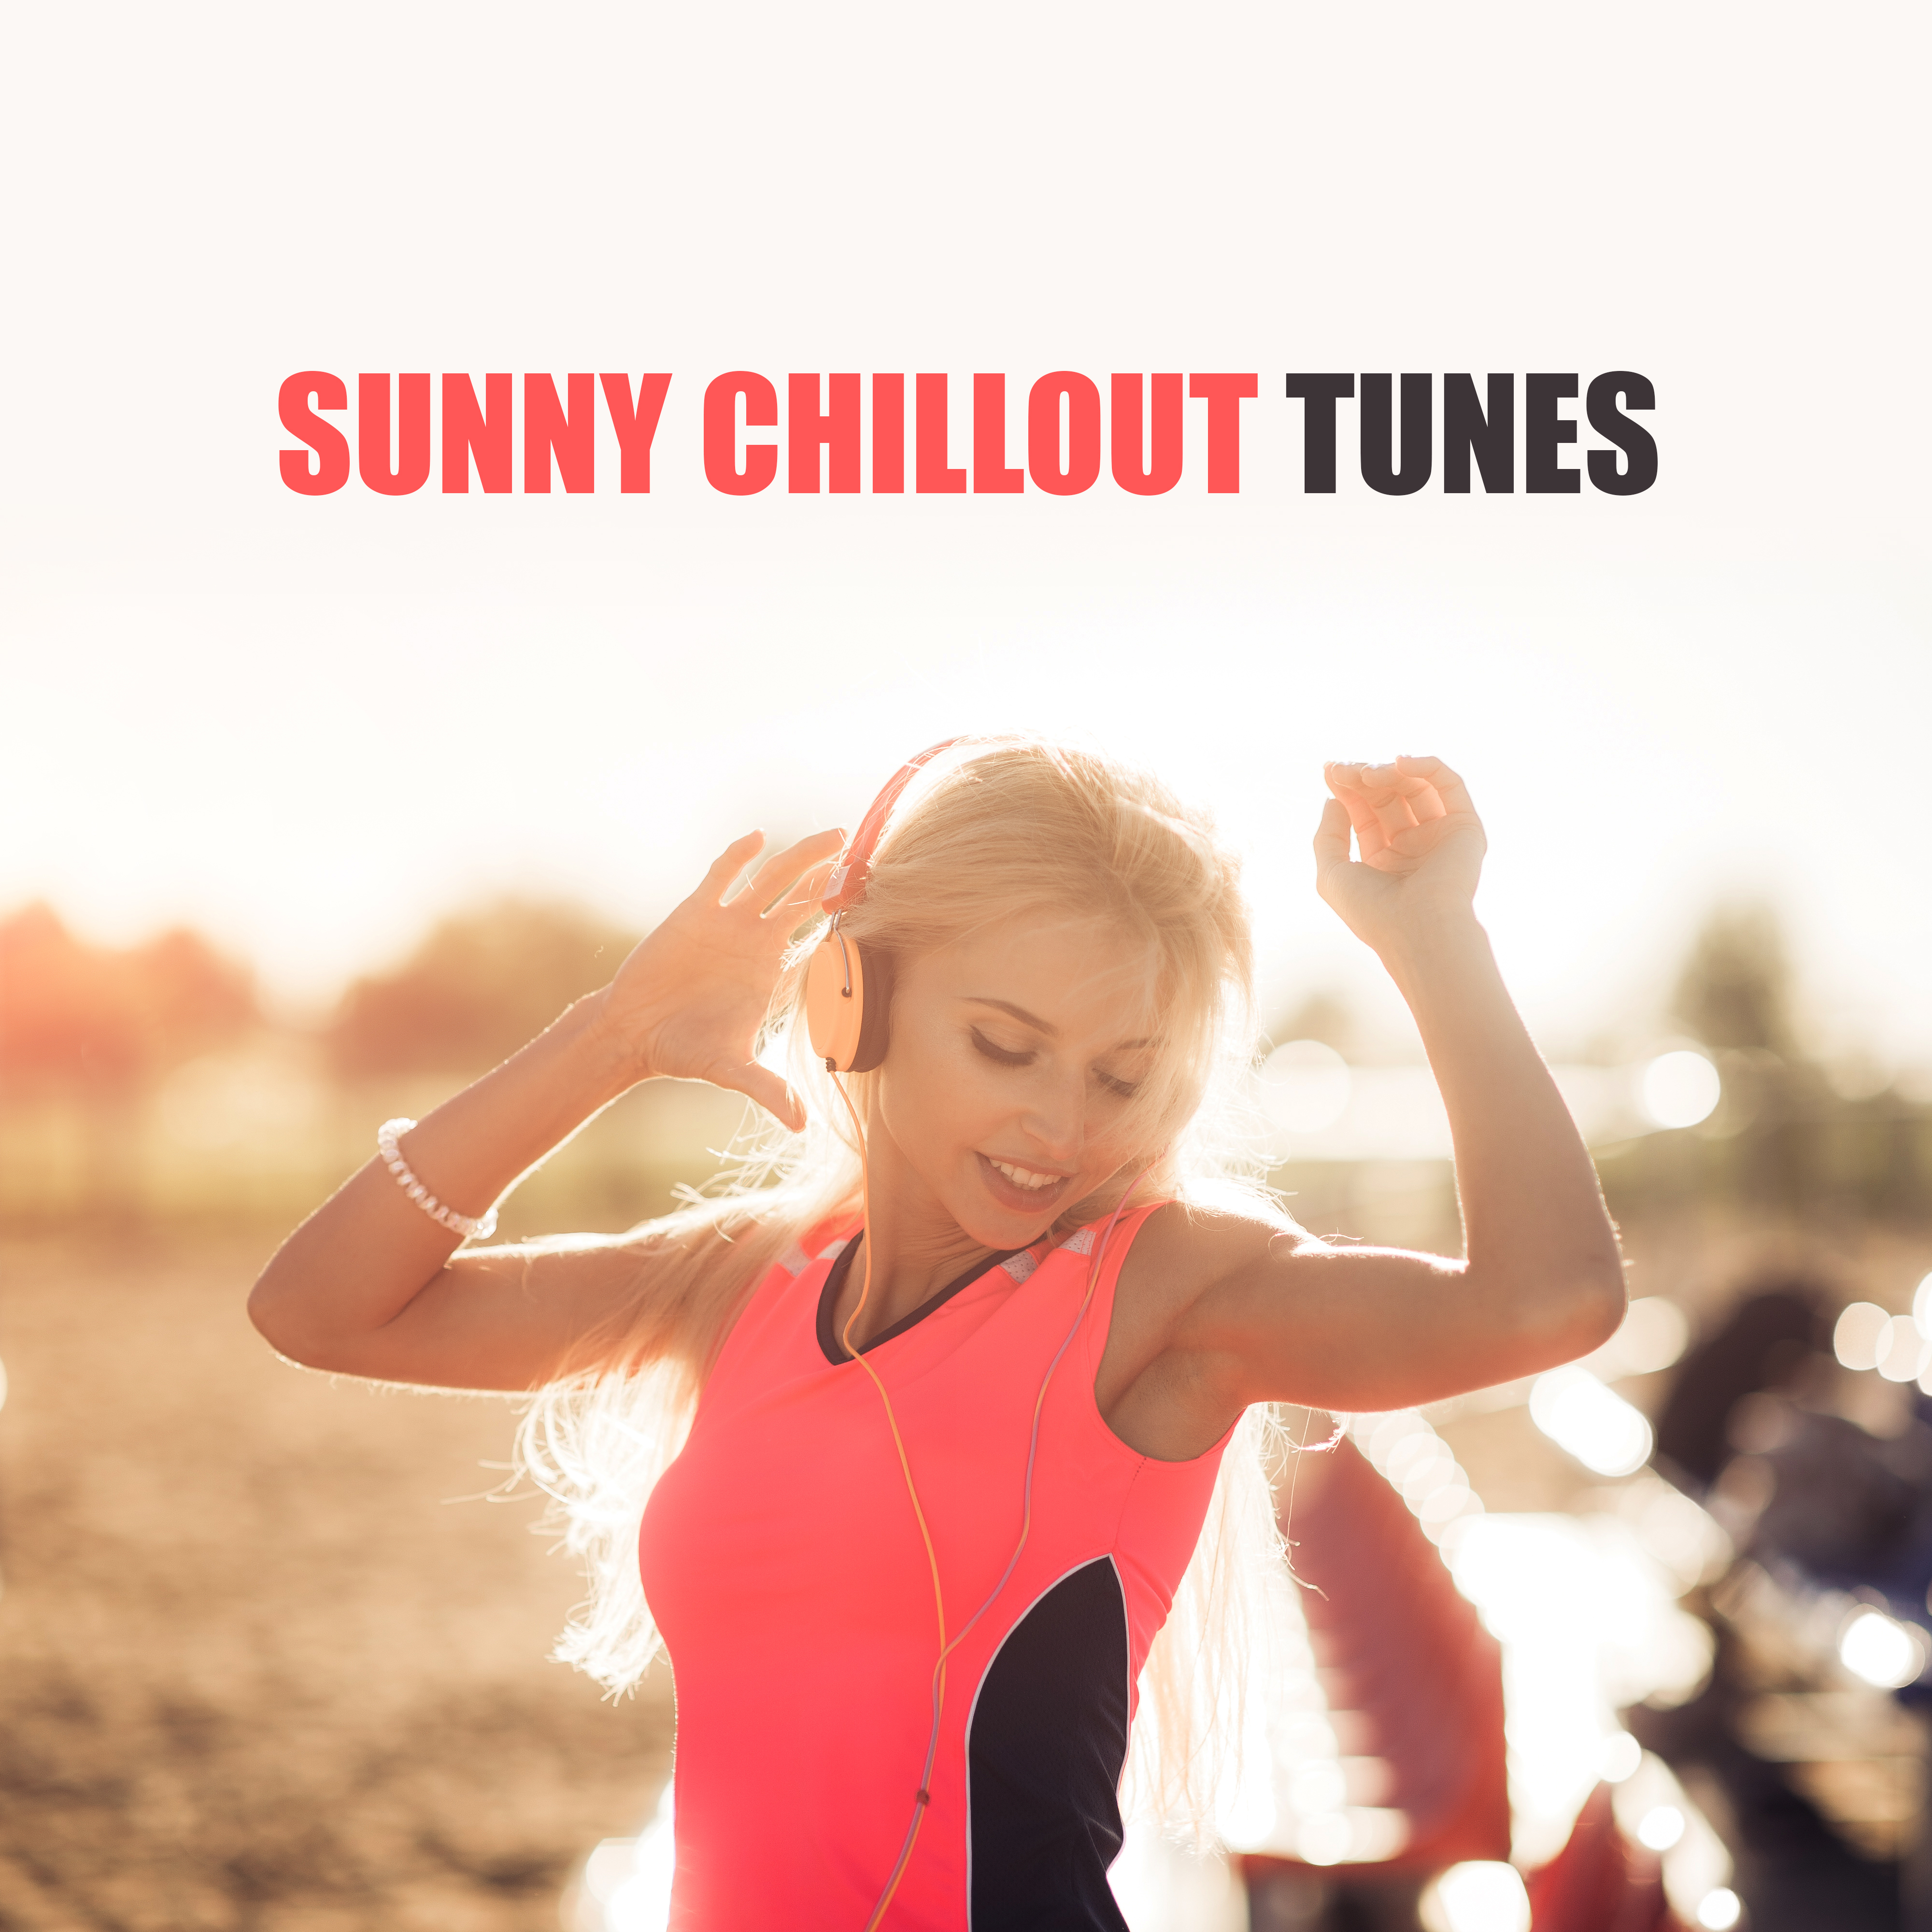 Sunny Chillout Tunes – 2018 Chill Out